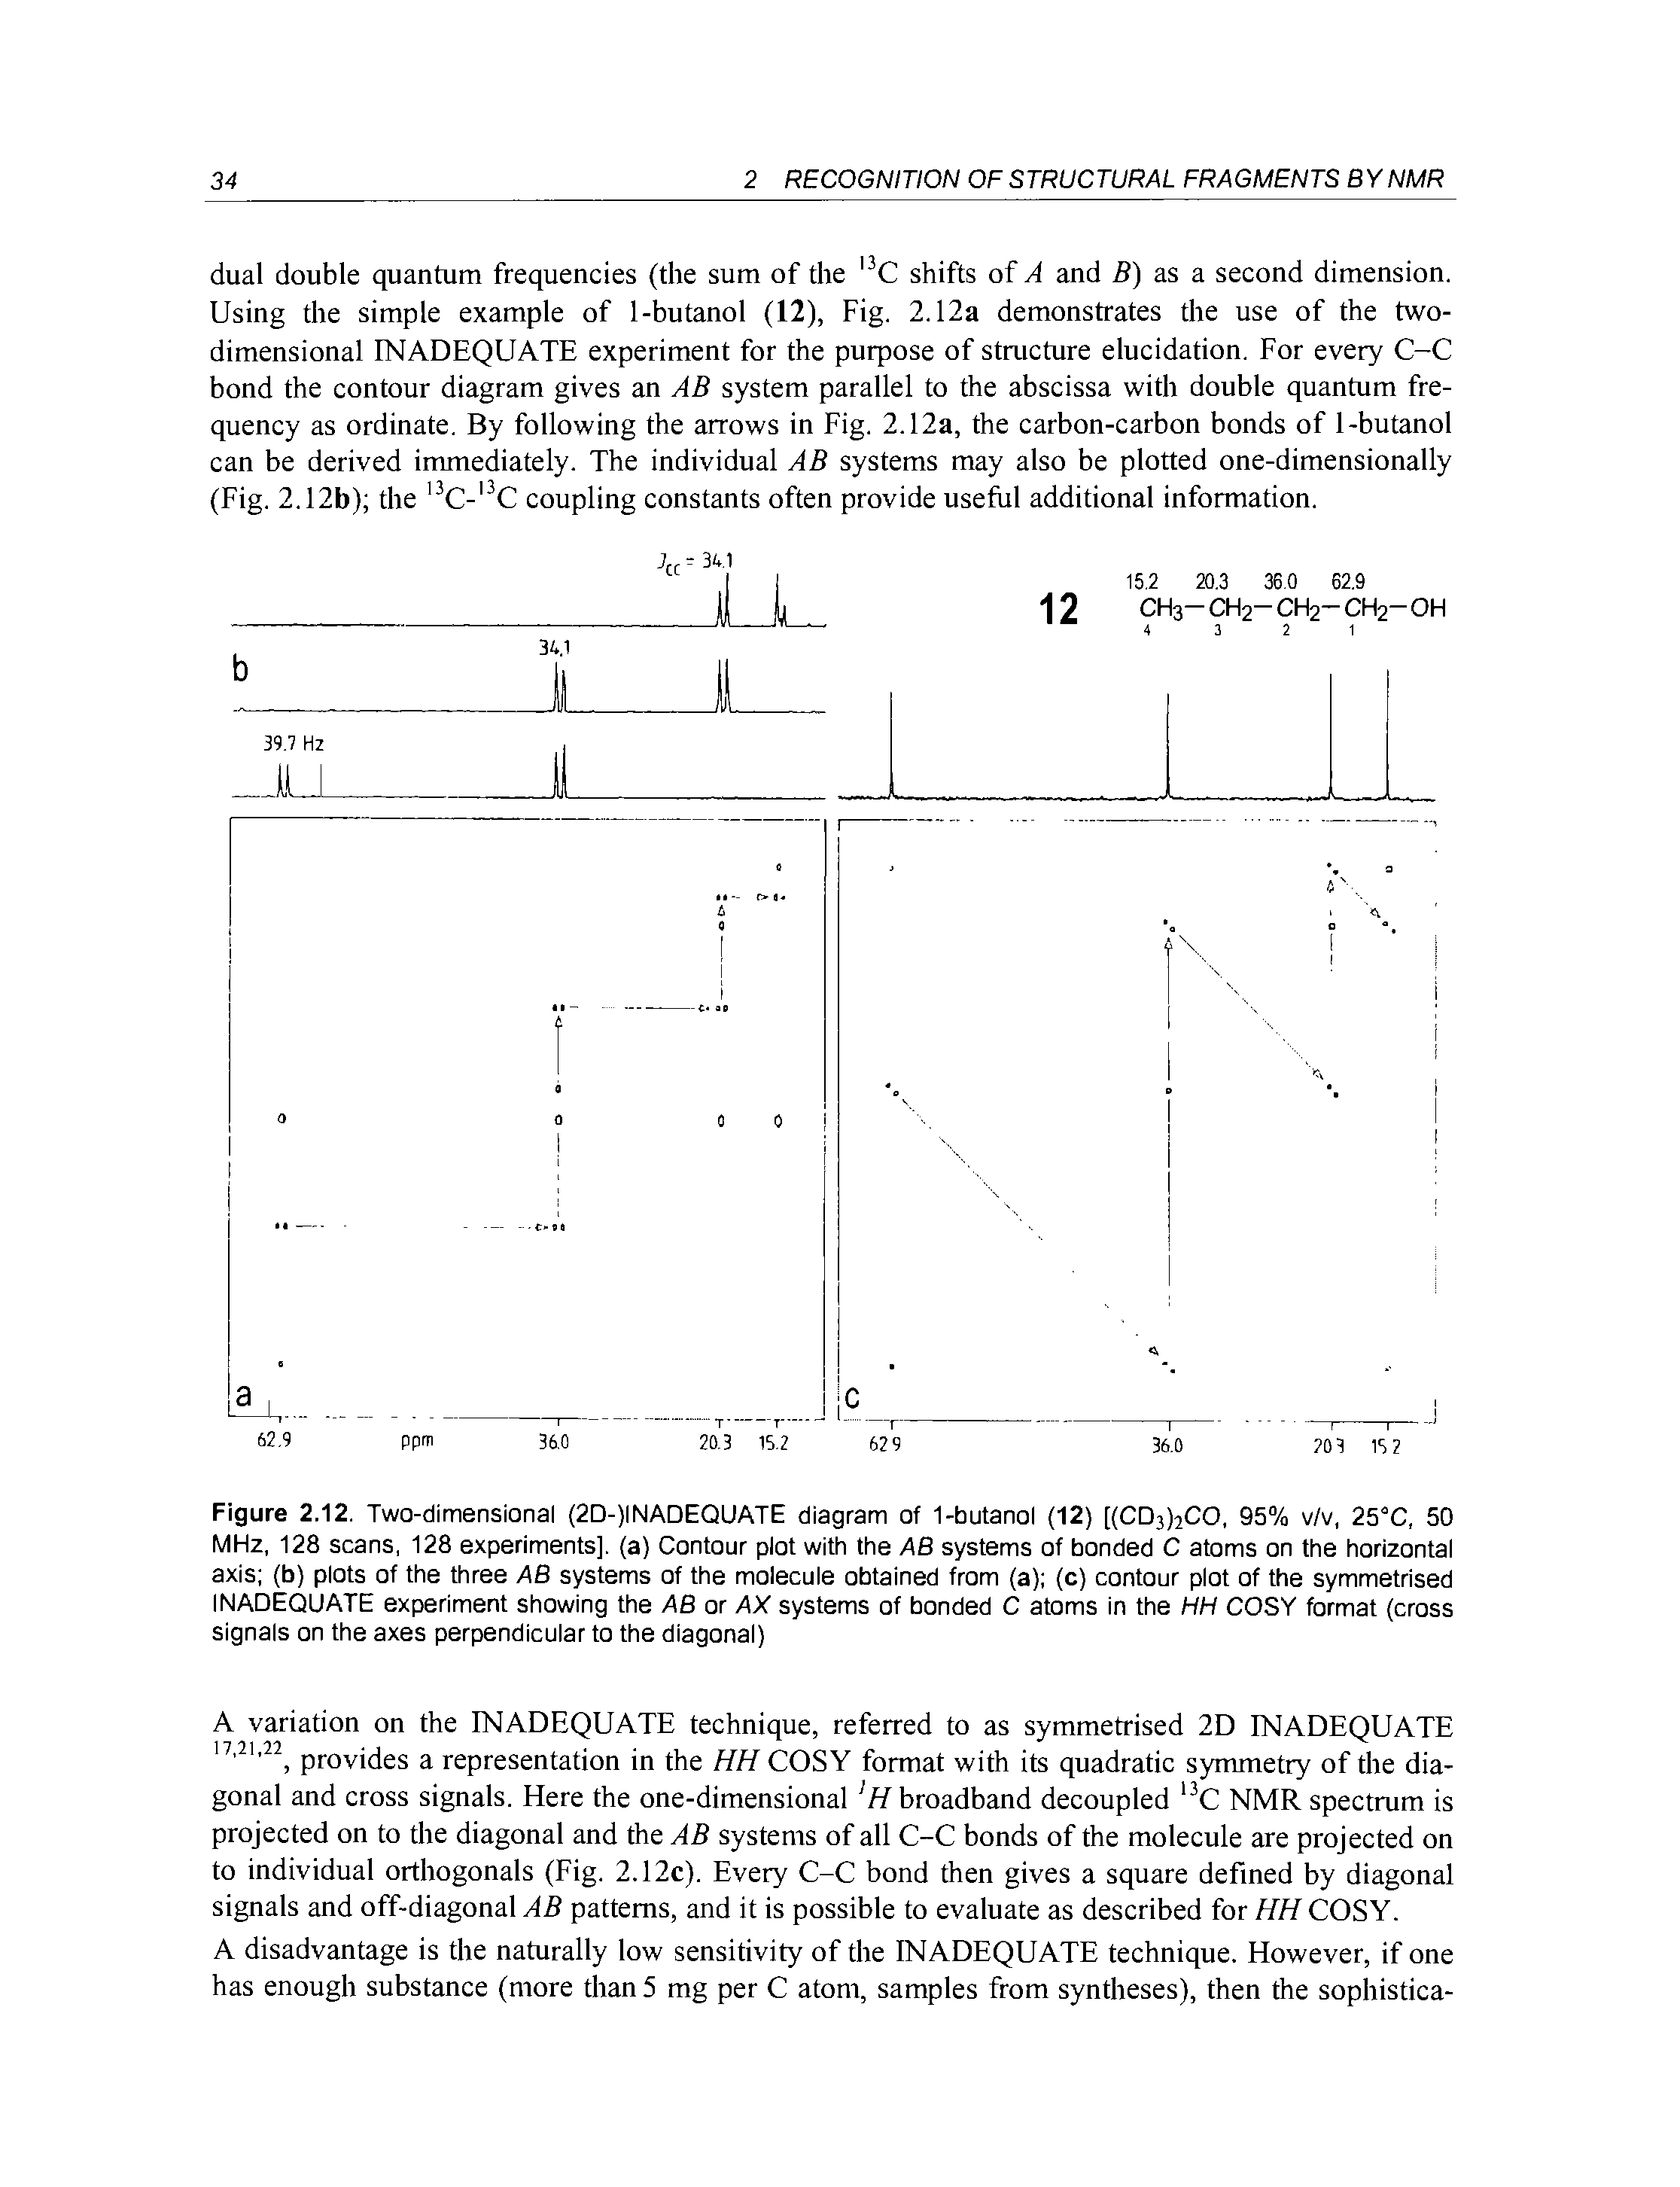 Figure 2.12. Two-dimensional (2D-)INADEQUATE diagram of 1-butanol (12) [ CDajzCO, 95% v/v, 25°C, 50 MHz, 128 scans, 128 experiments], (a) Contour plot with the AB systems of bonded C atoms on the horizontal axis (b) plots of the three AB systems of the molecule obtained from (a) (c) contour plot of the symmetrised INADEQUATE experiment showing the AB or AX systems of bonded C atoms in the HH COSY format (cross signals on the axes perpendicular to the diagonal)...